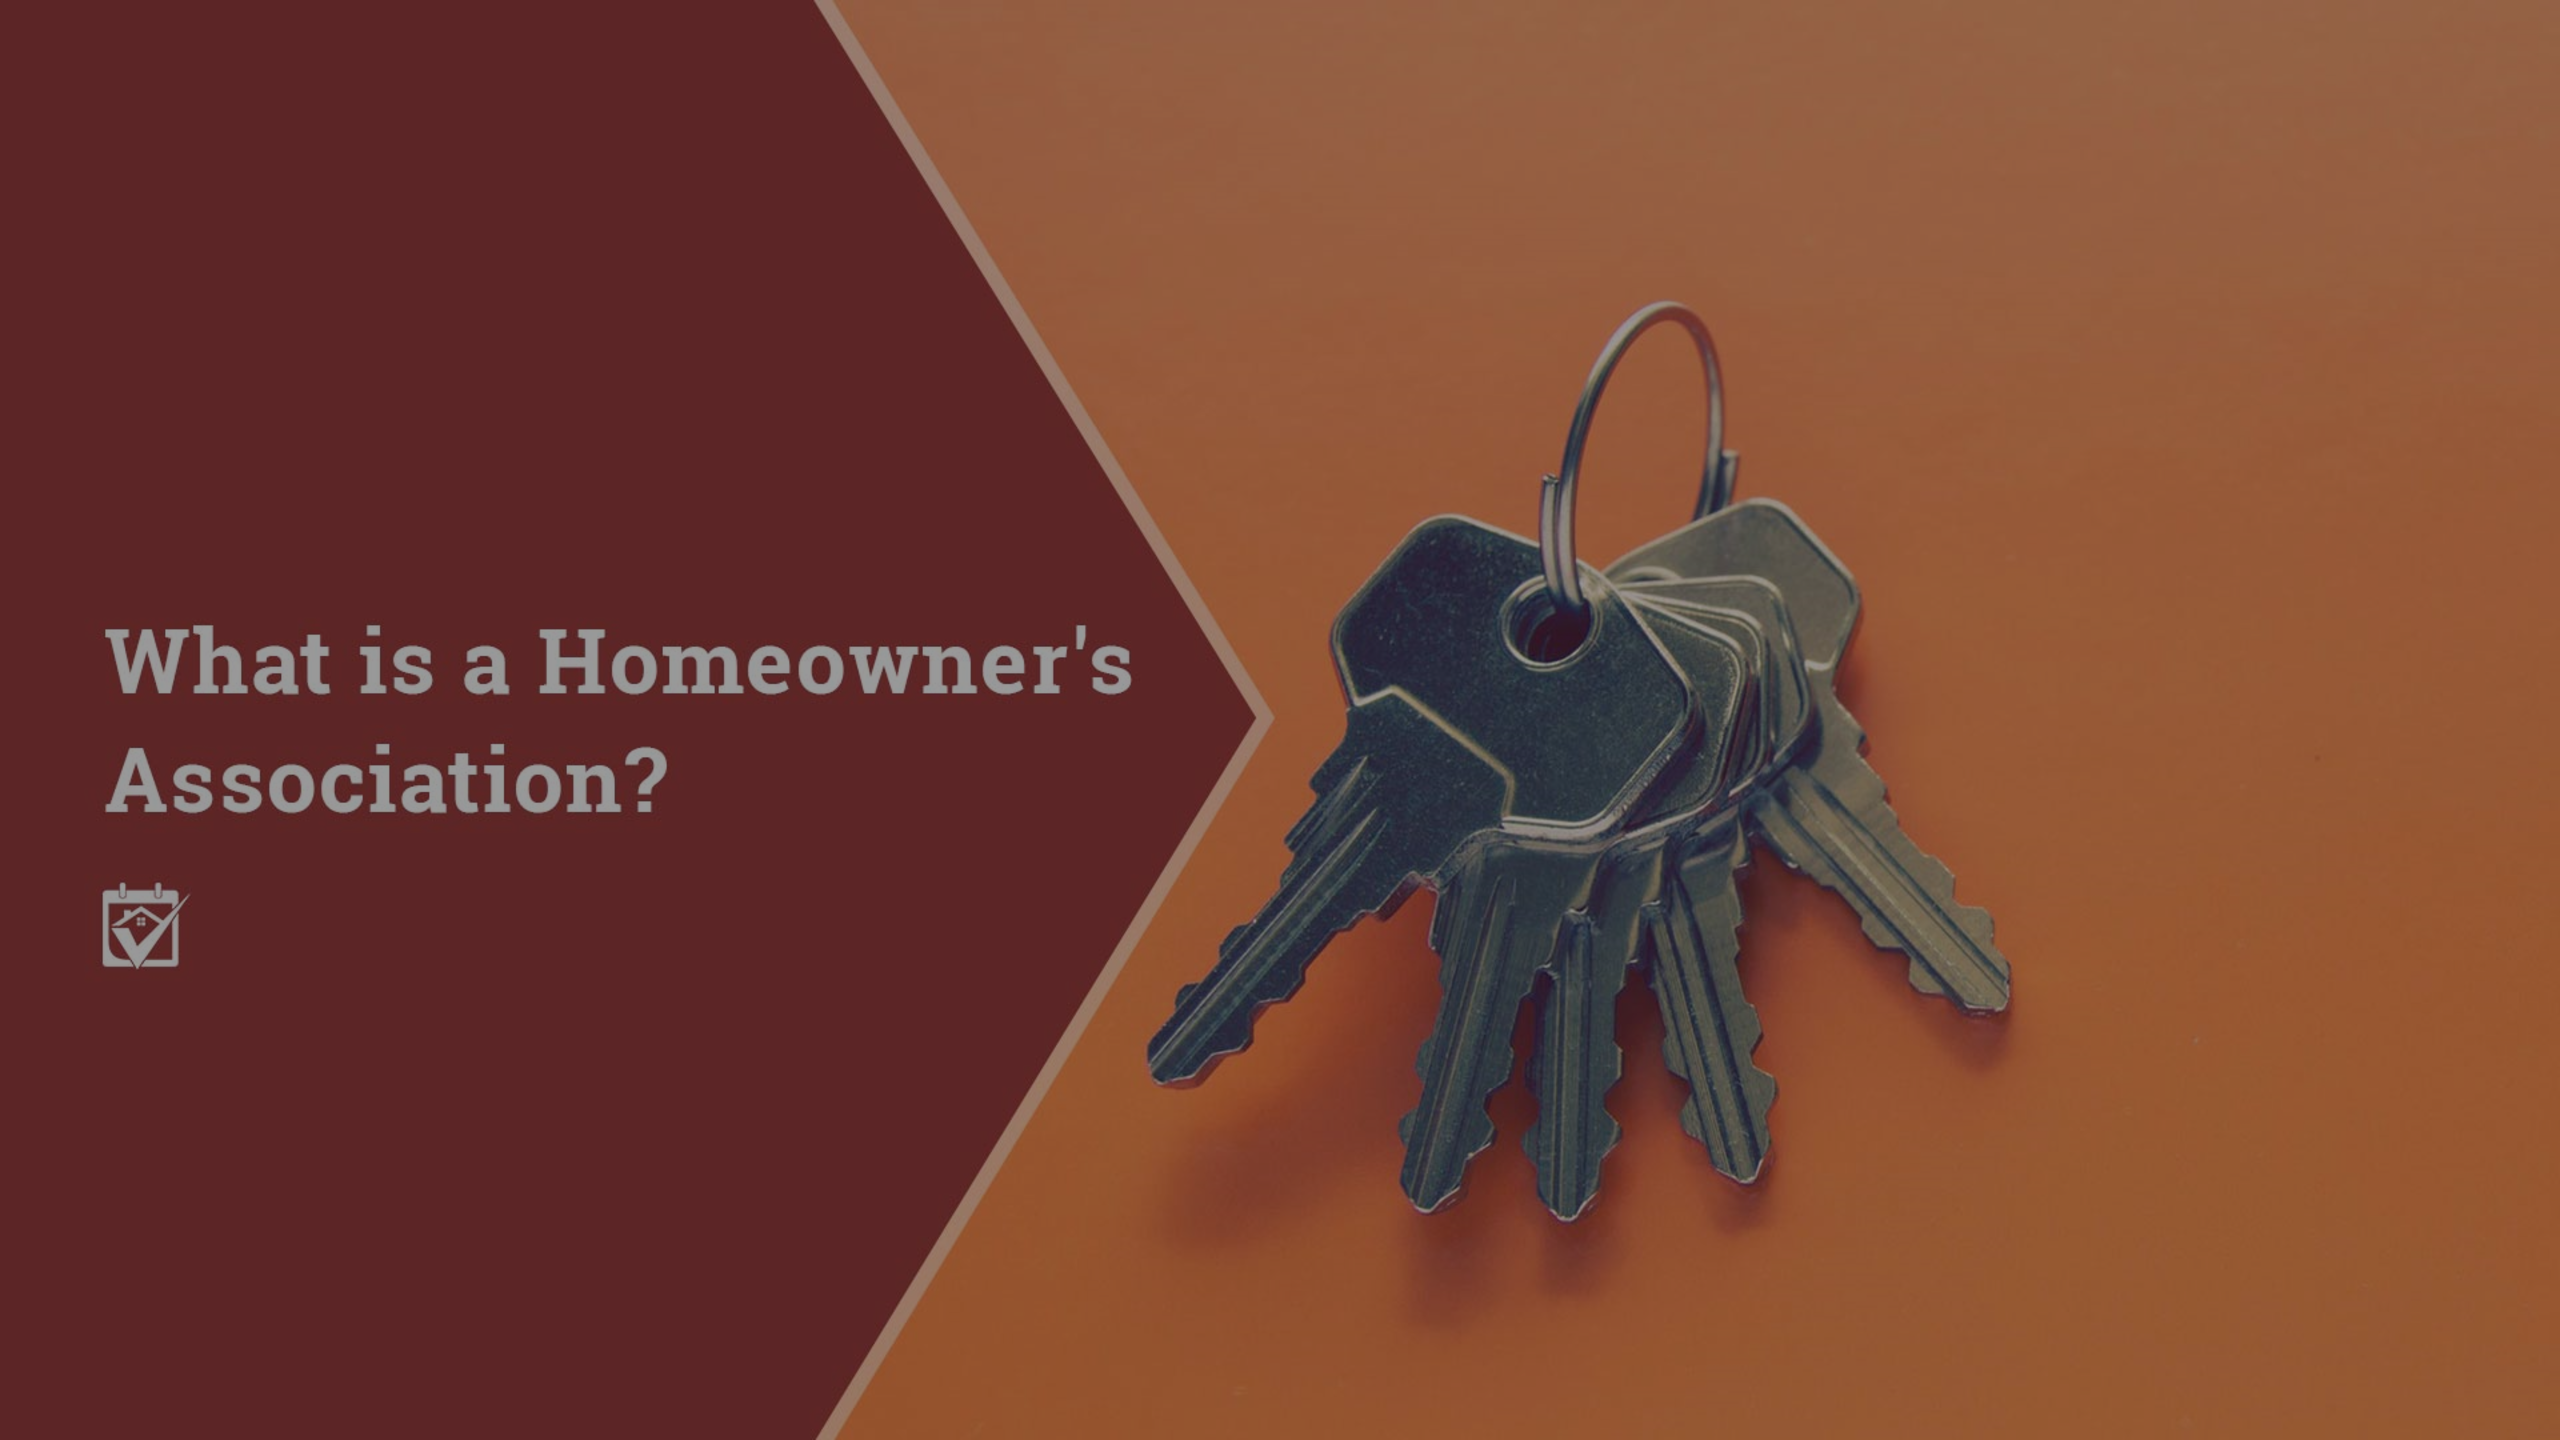 What is a Homeowner’s Association?